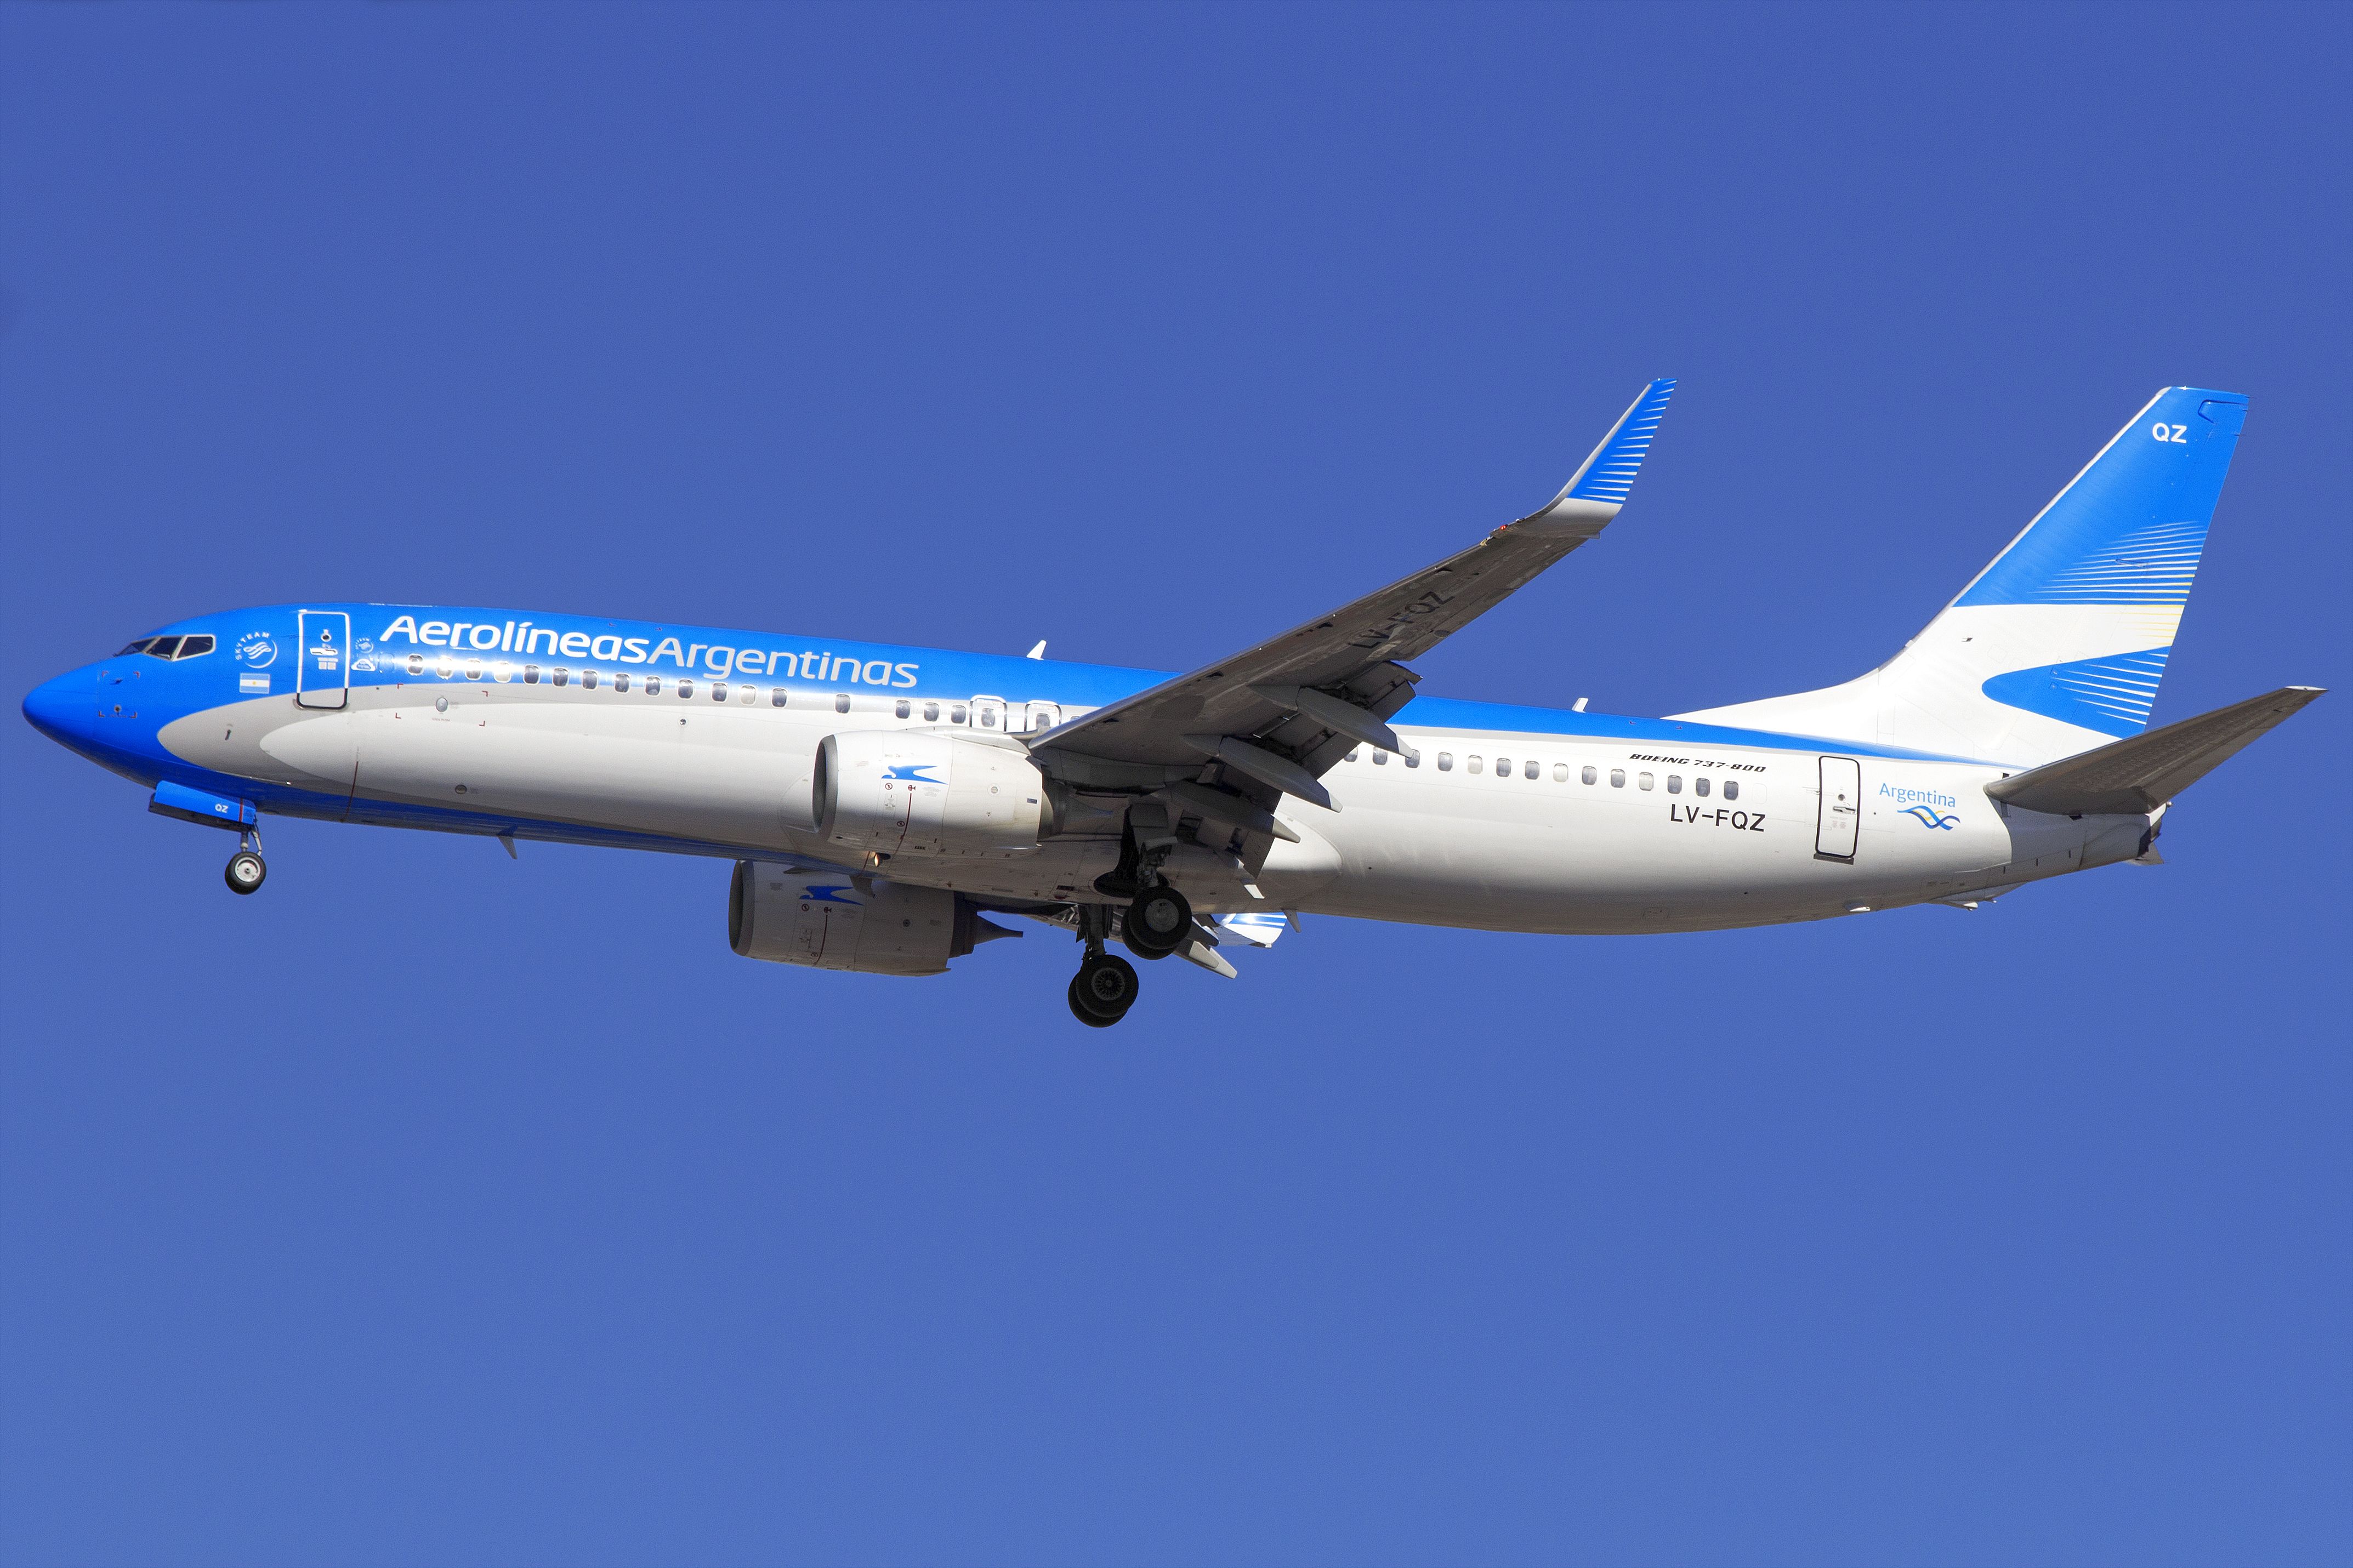 An Aerolineas Argentinas Boeing 737-800 flying in the sky.